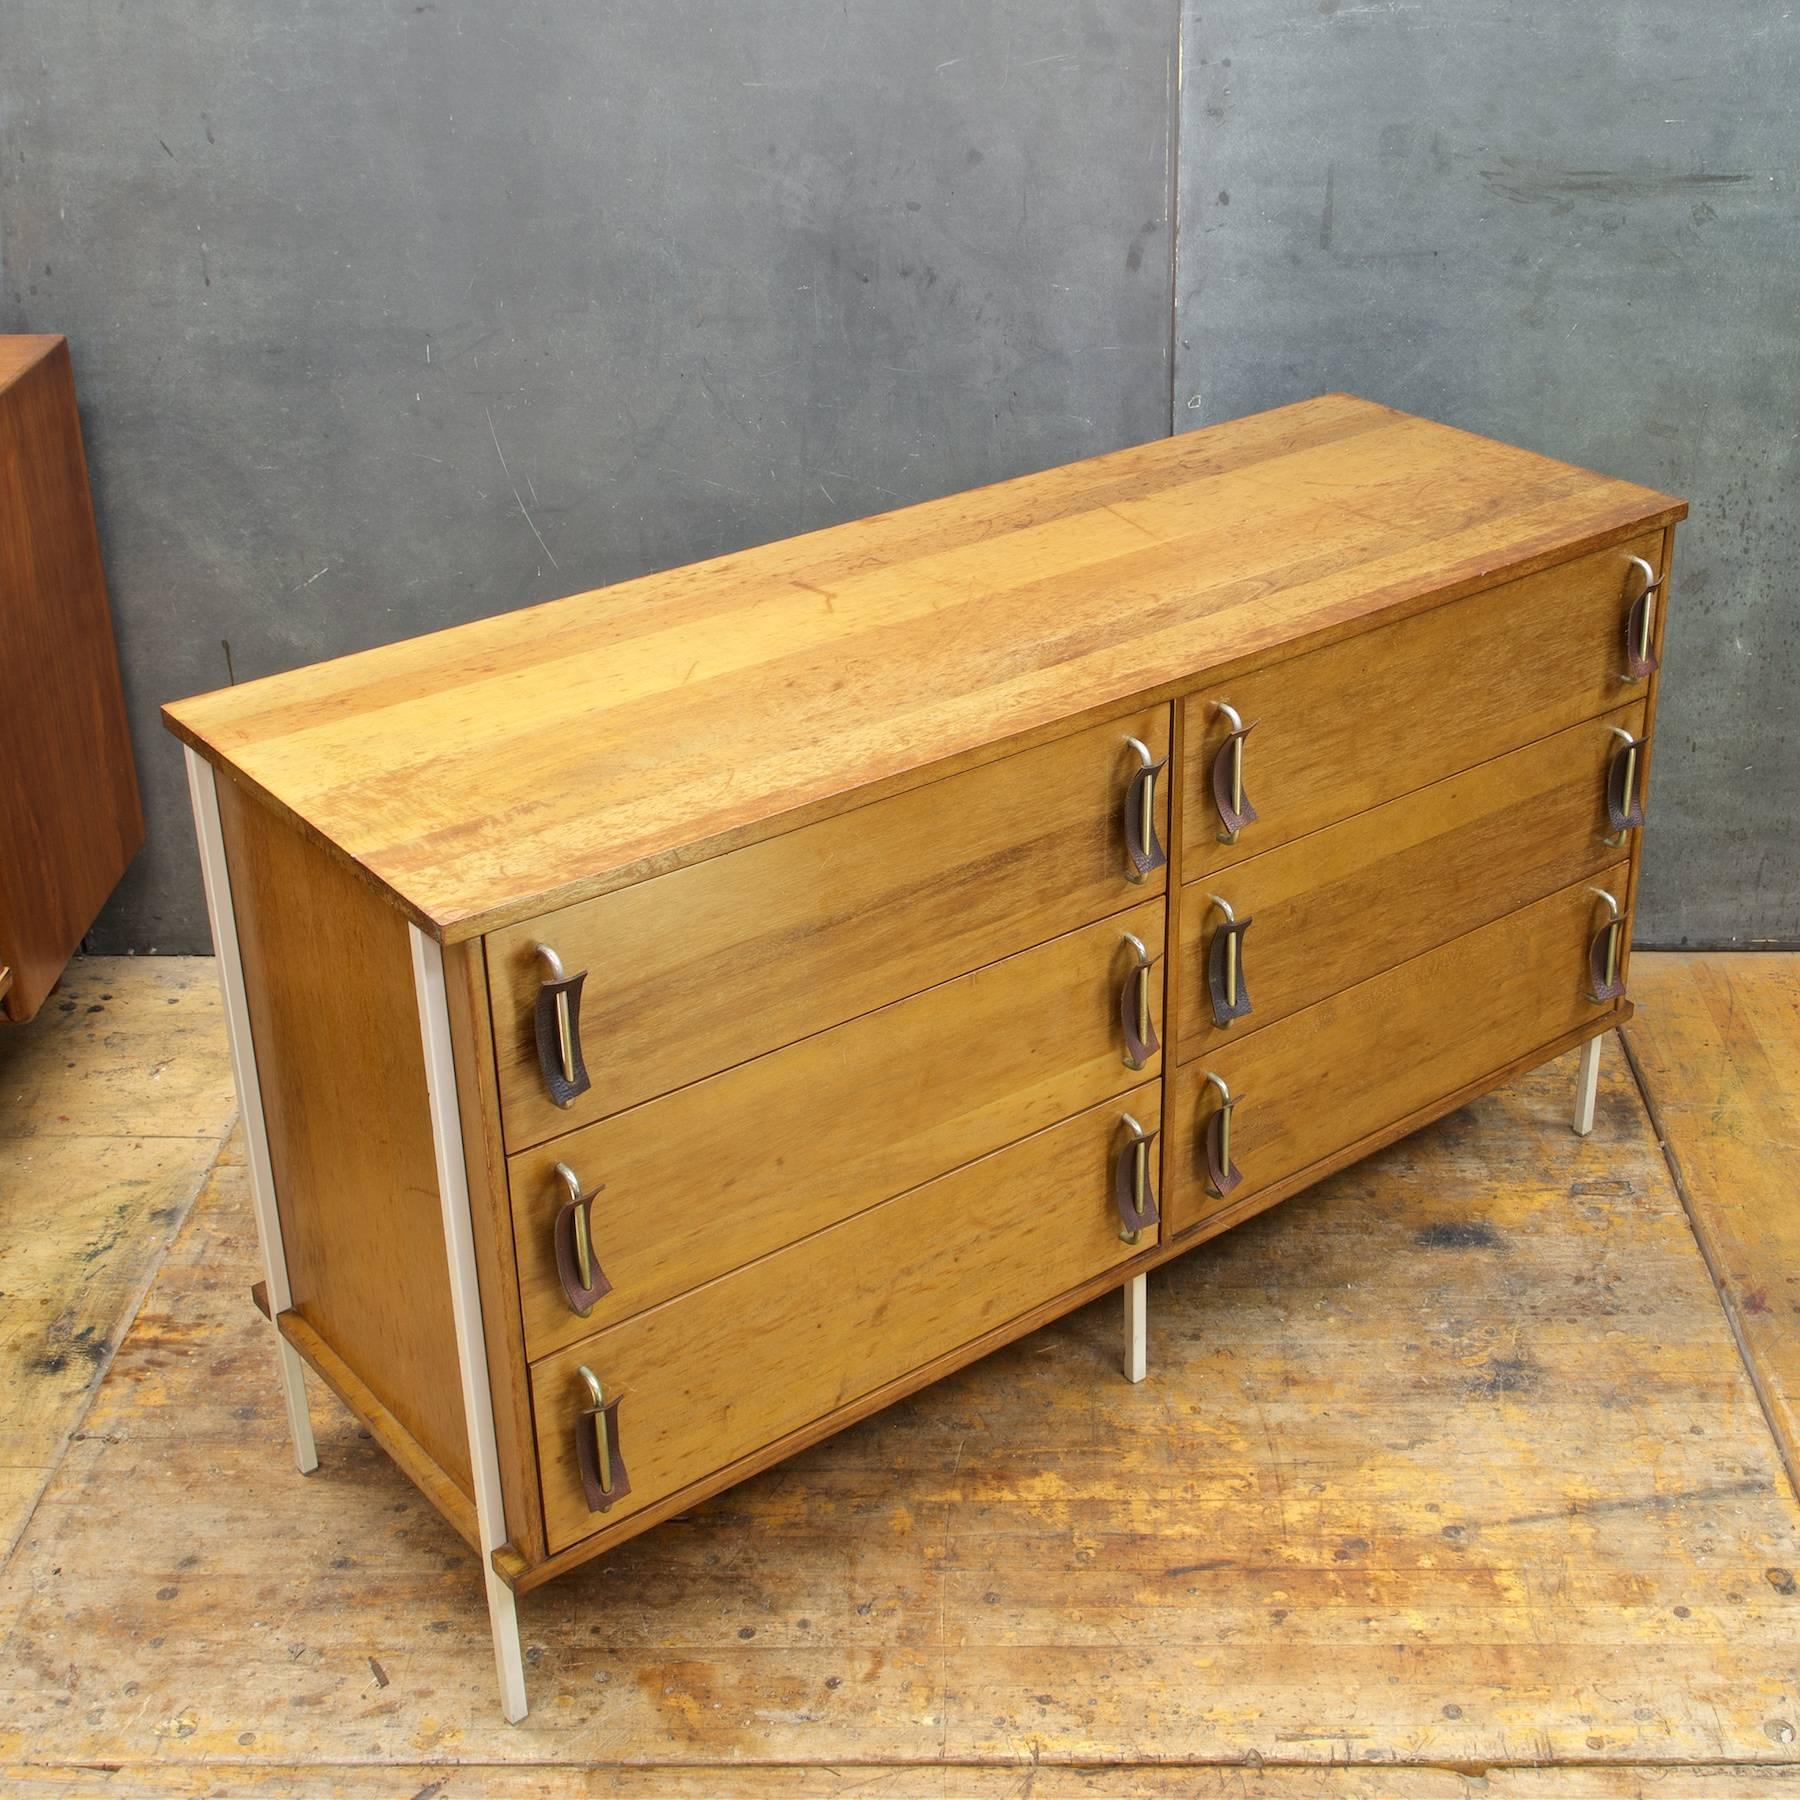 Very low production numbers, produced for only one year. True midcentury experimental rarity. No label or makers mark apparent. Solid wood construction, a heavy piece. Finished back.

Presented in original finish. A very Rare dresser designed by